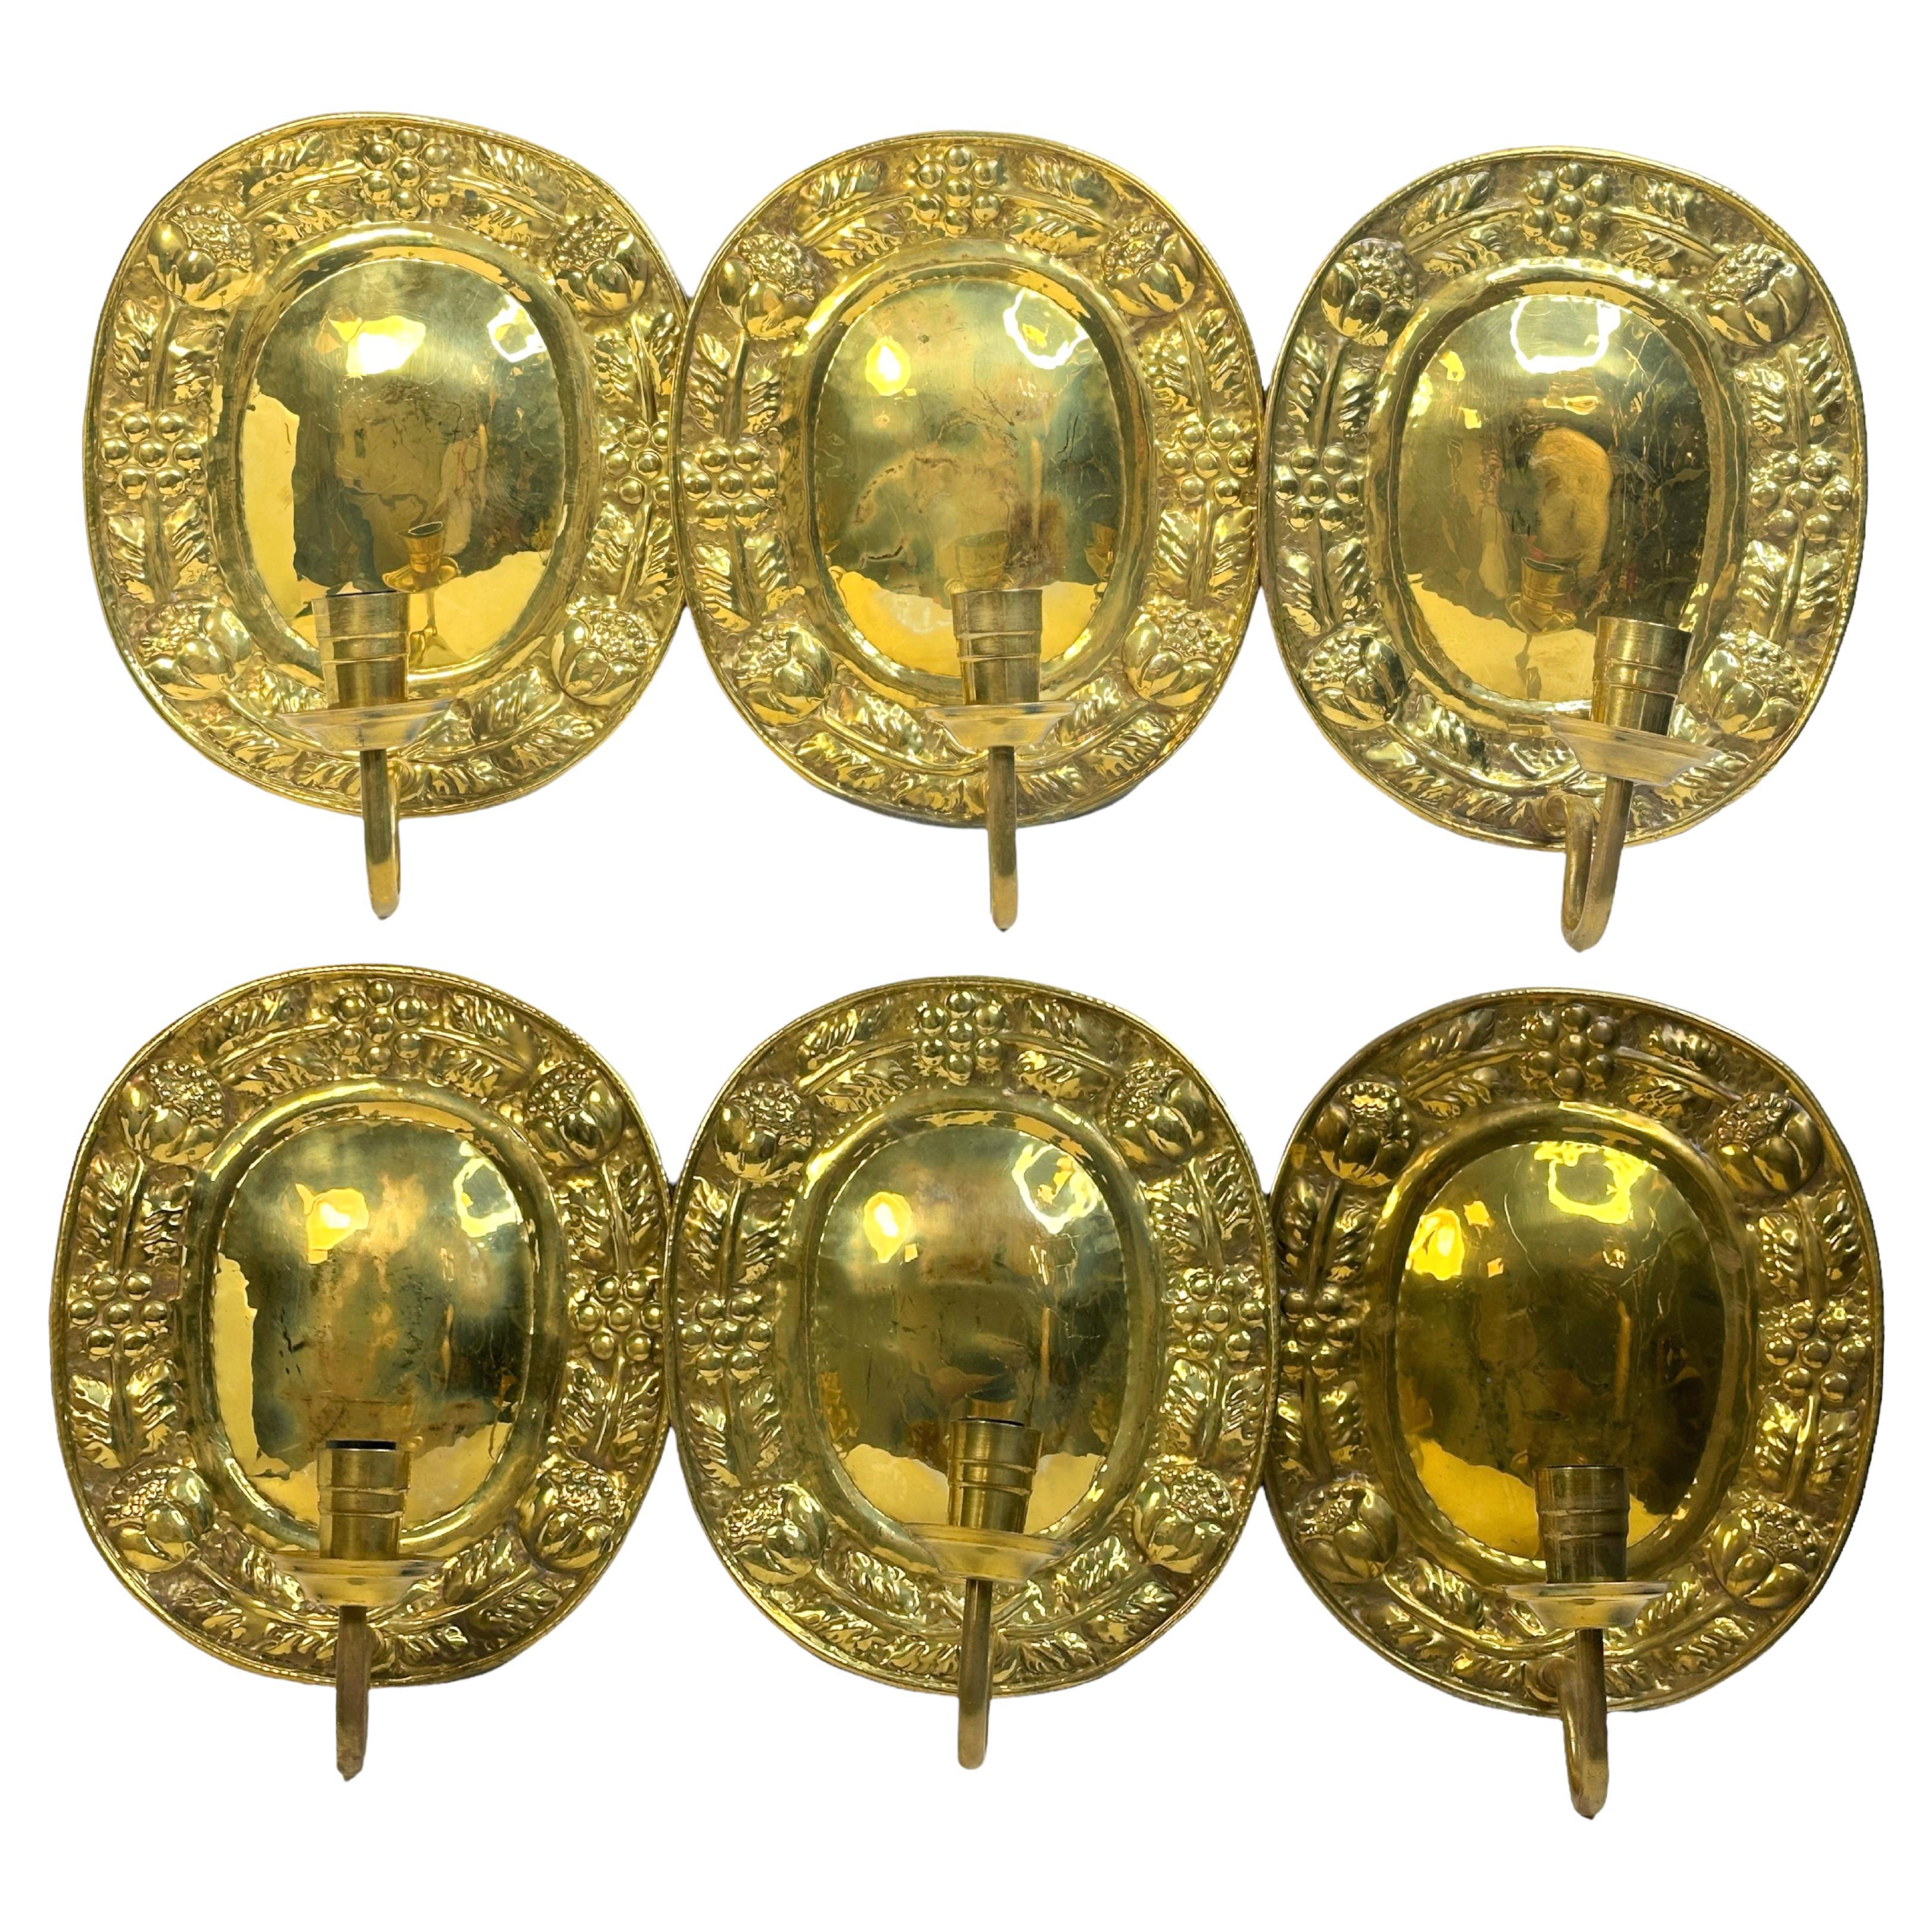 Set of Six Hollywood Regency Brass Wall Candle Sconces Flower Motif, 1920s